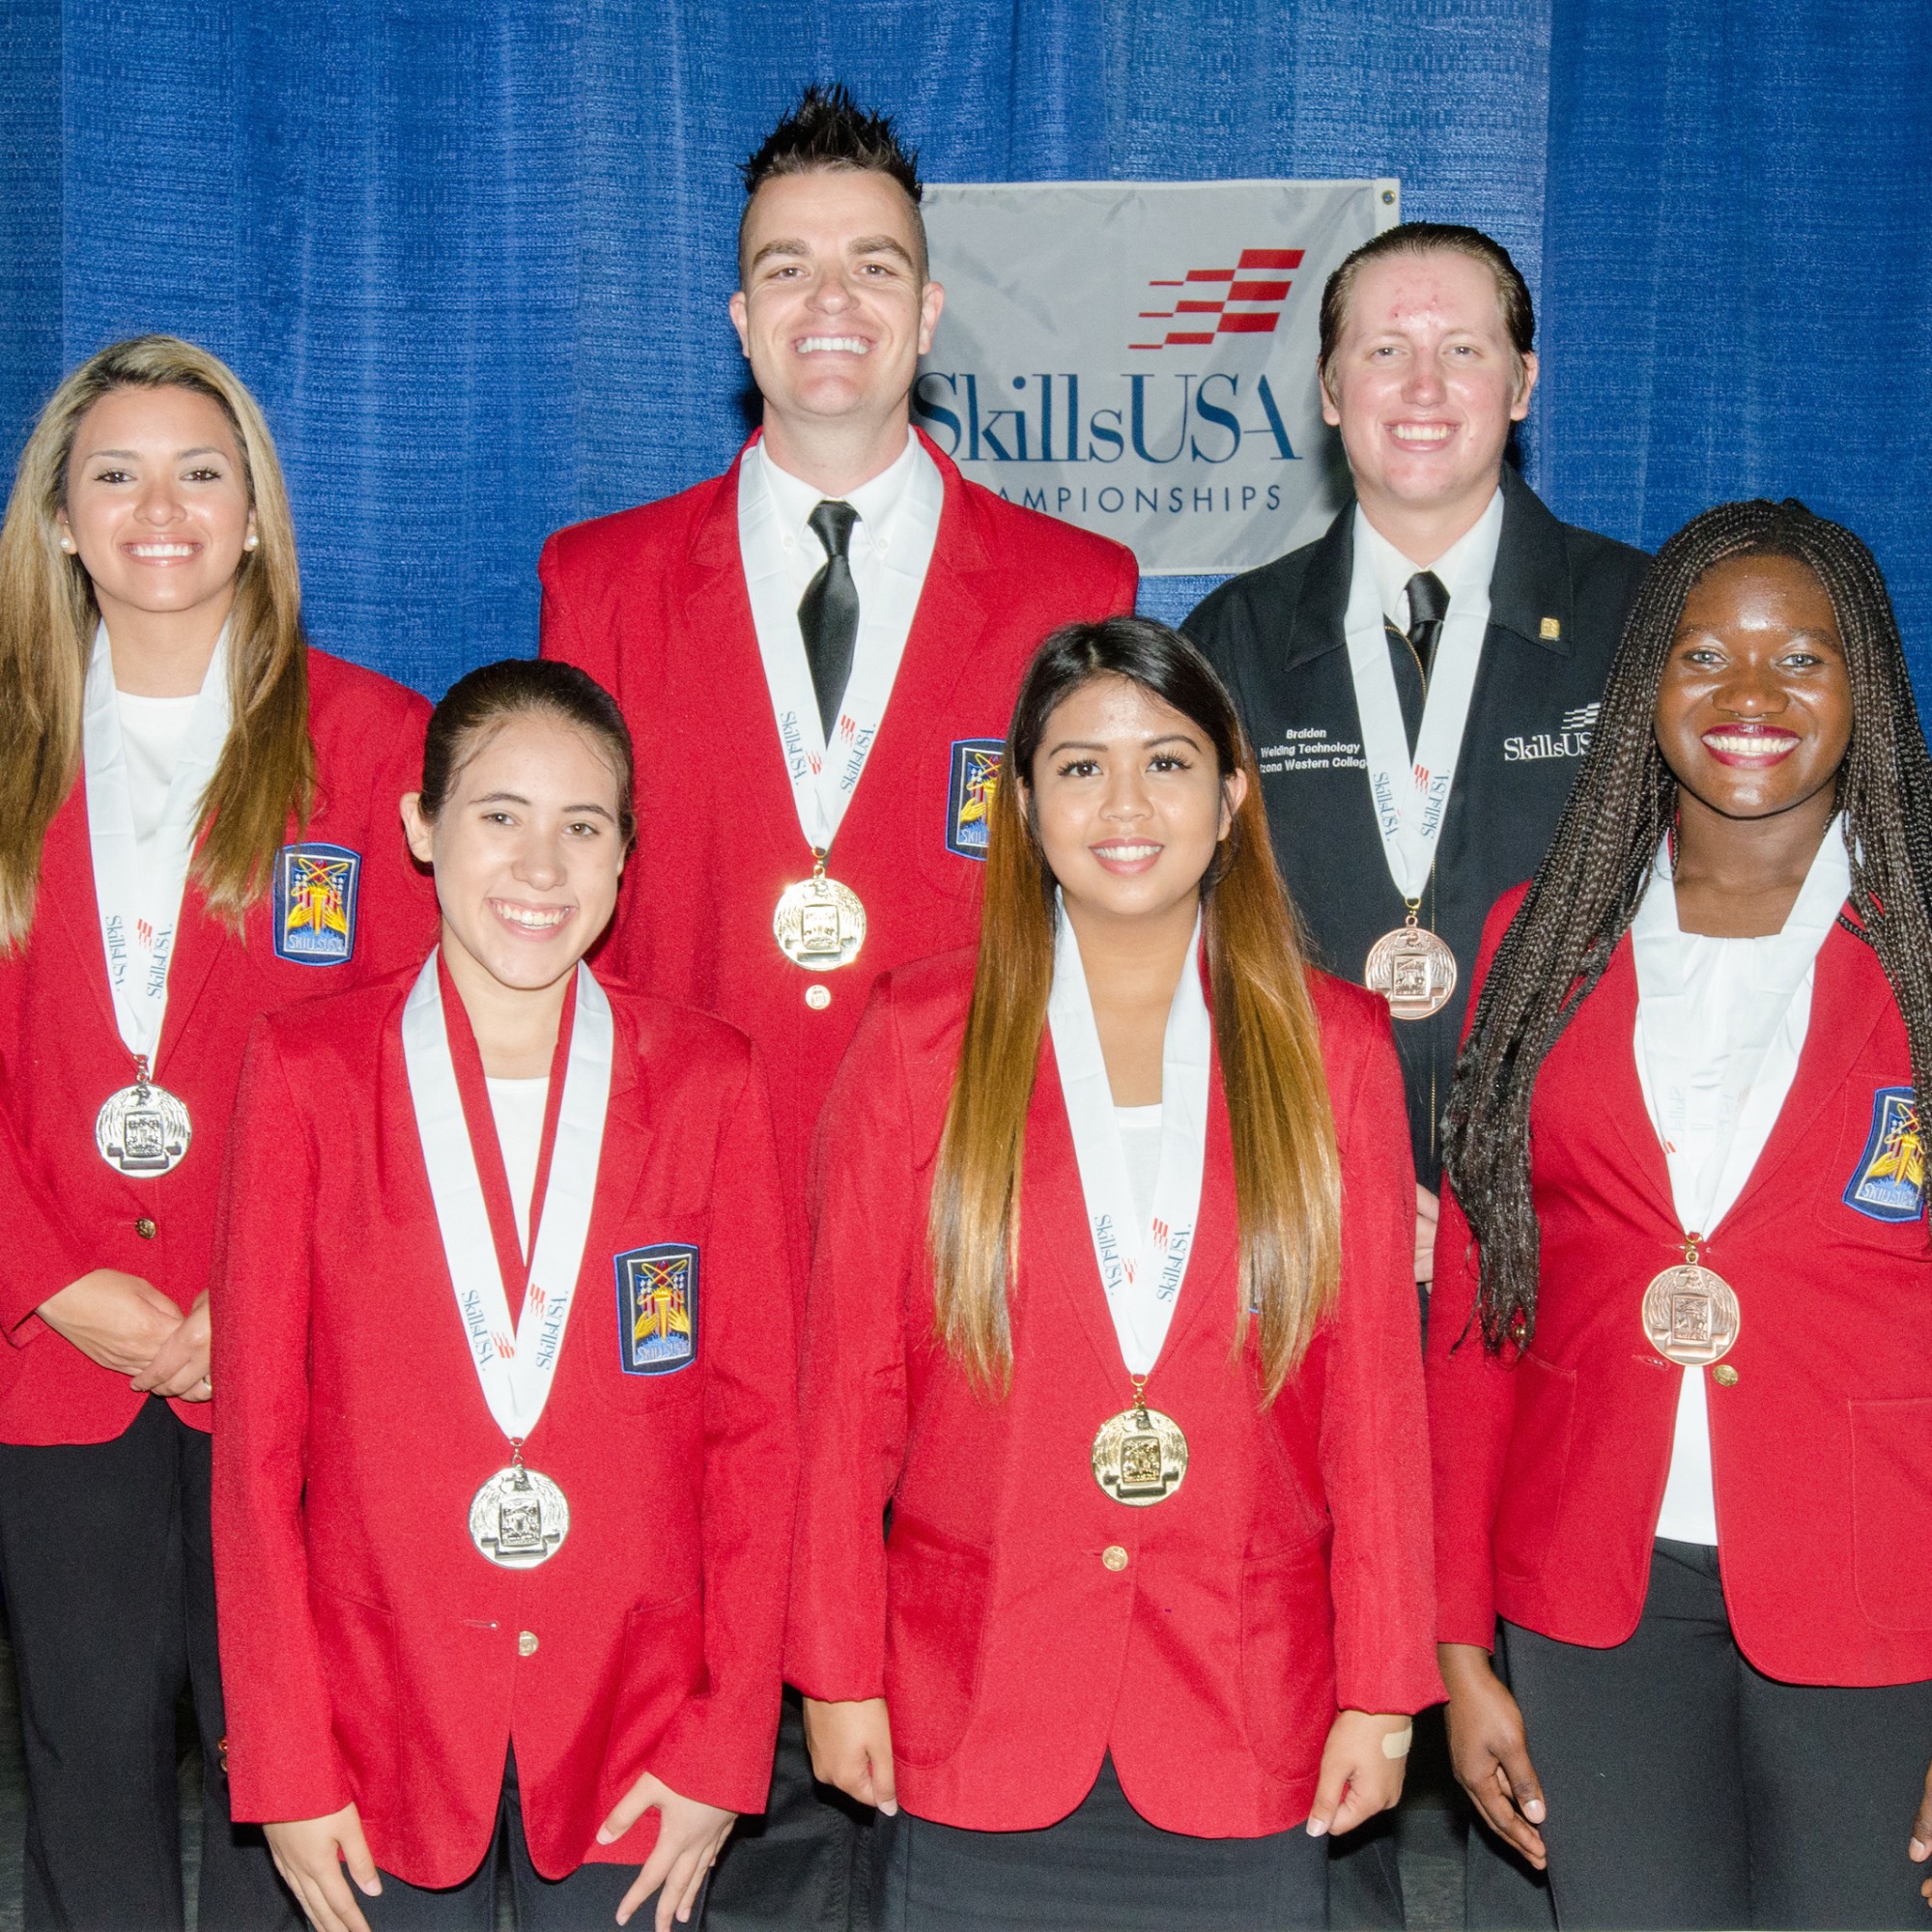 SkillsUSA students with their awards